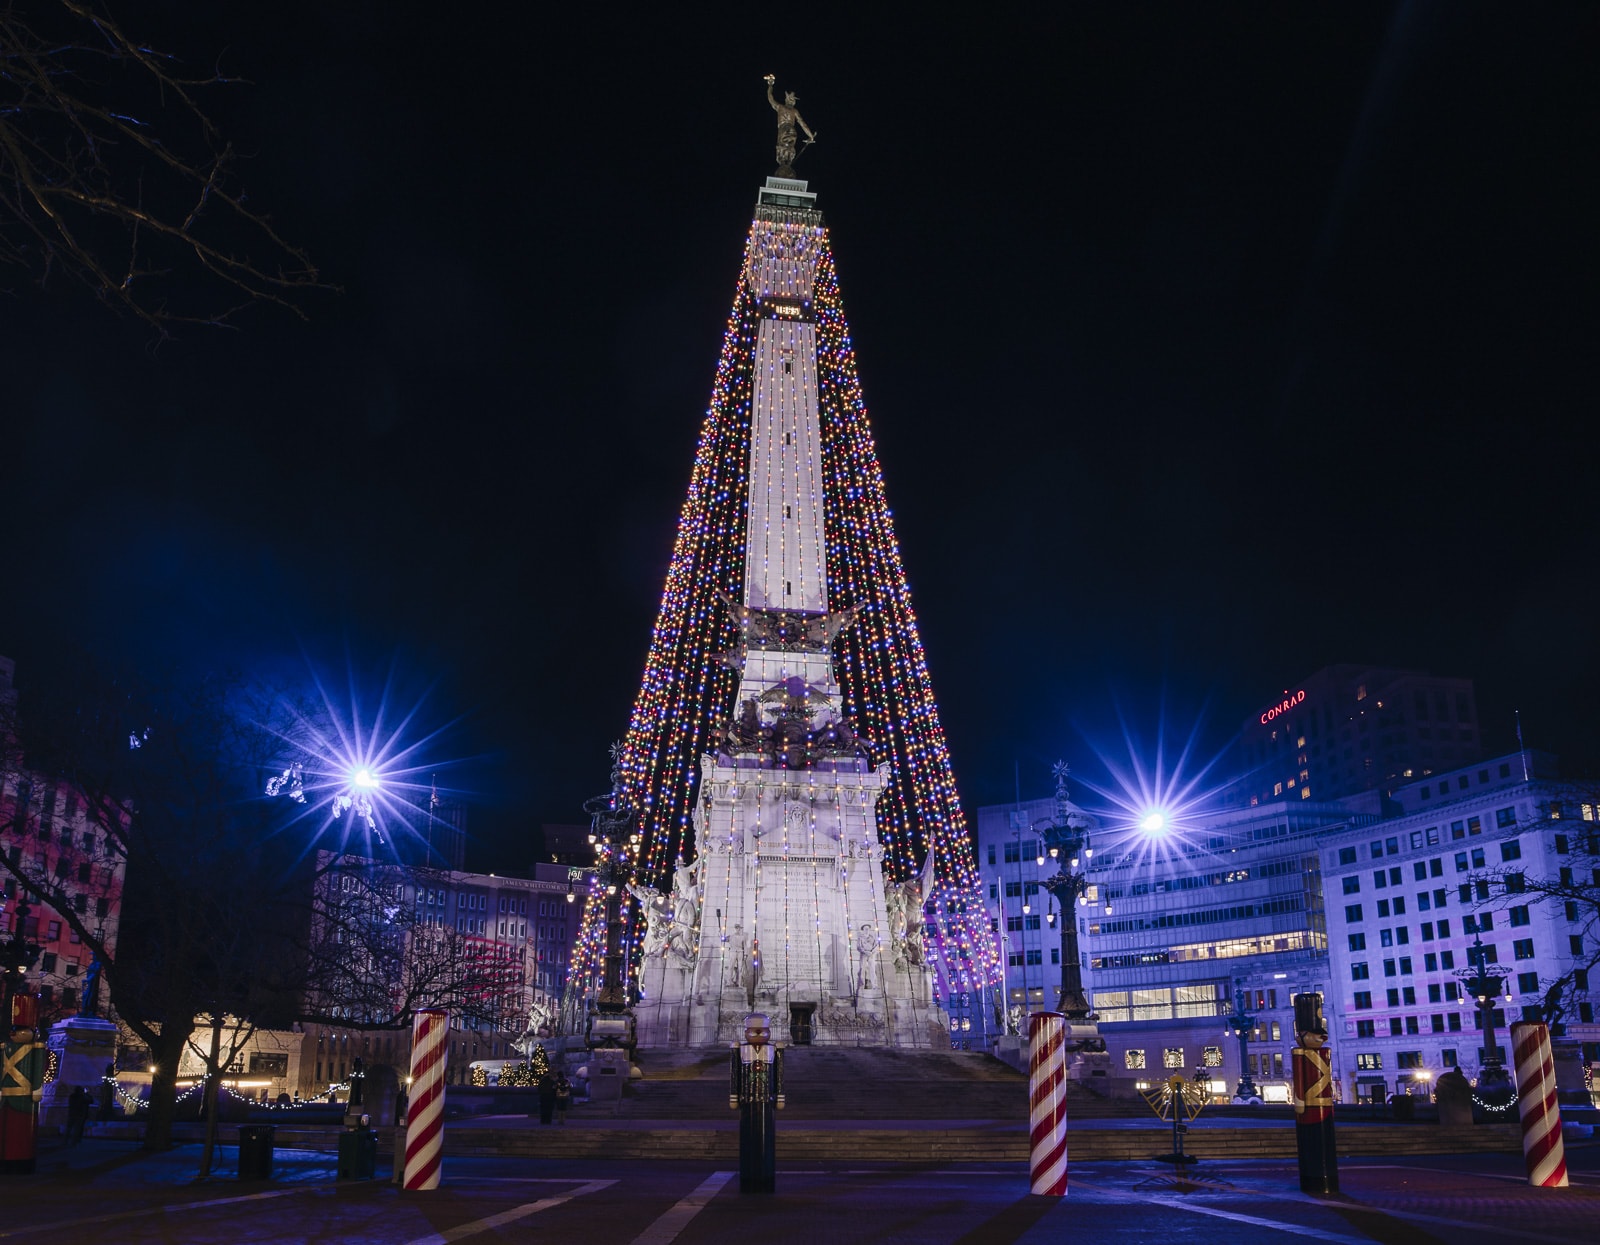 The "World's Largest Christmas Tree" In Indianapolis At Night